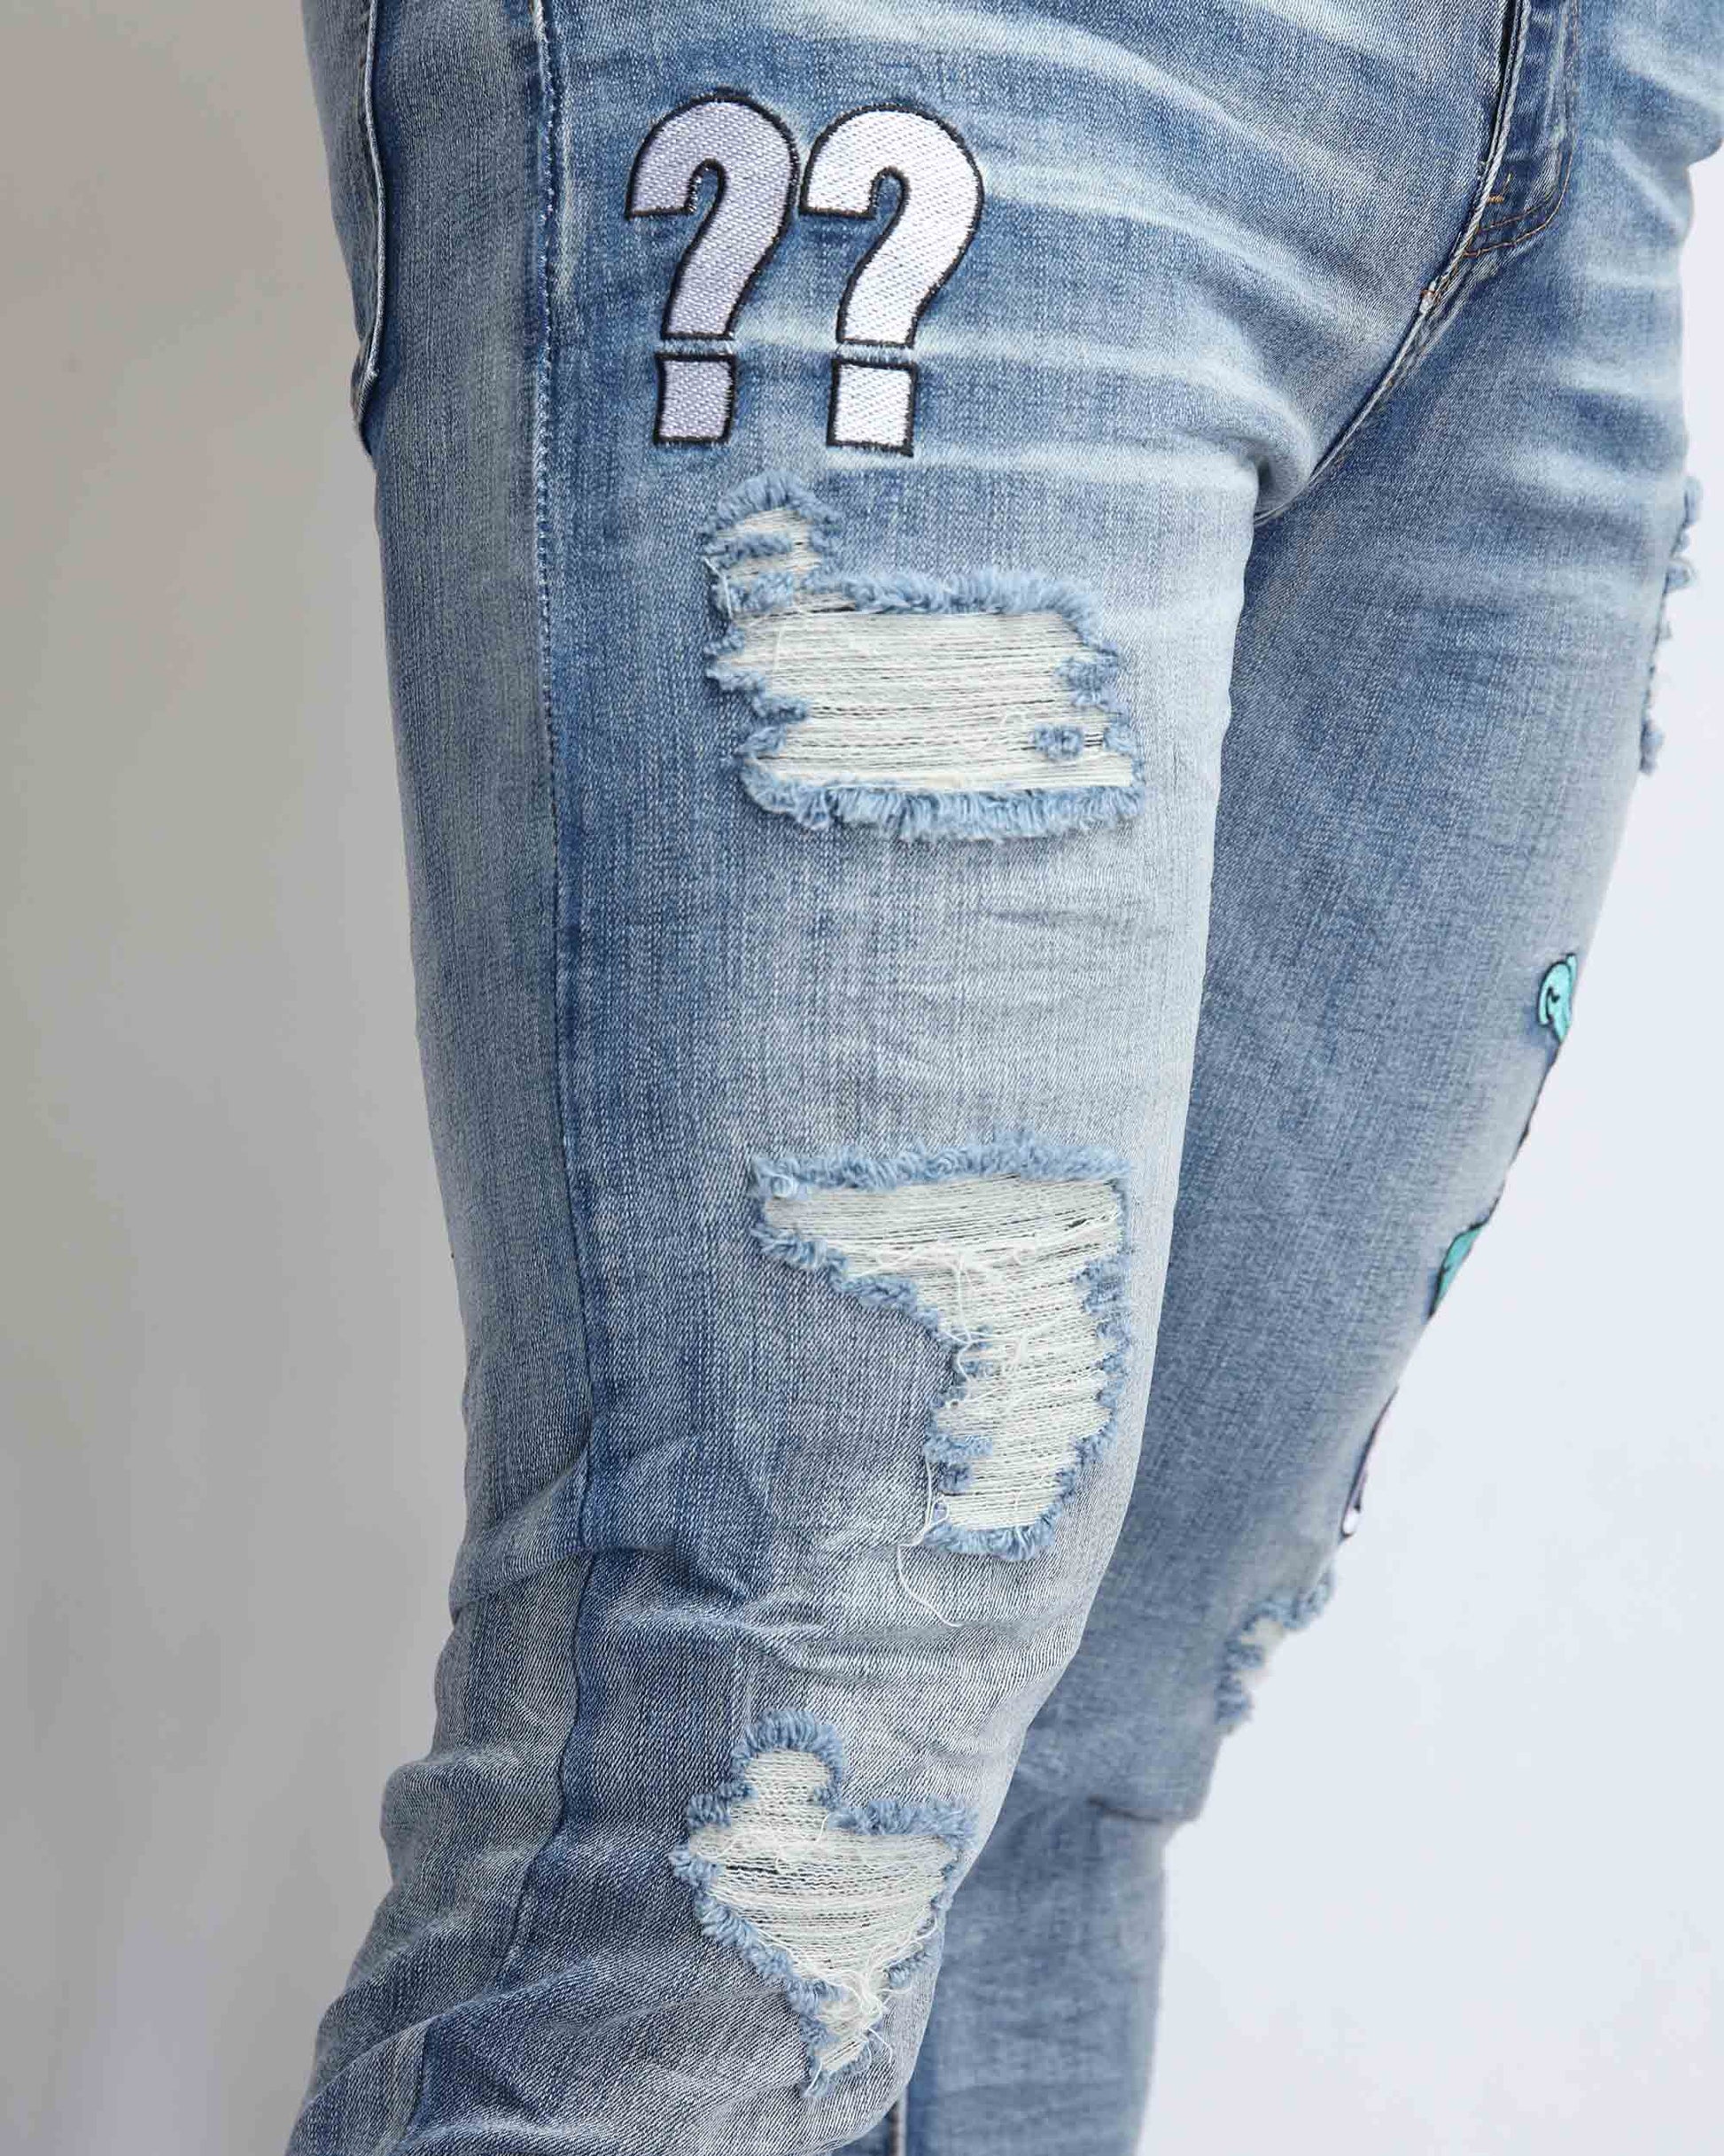 Light Wash Ripped BlueJeans with Skull Embroidered - CLASSY CLOSET BOUTIQUE